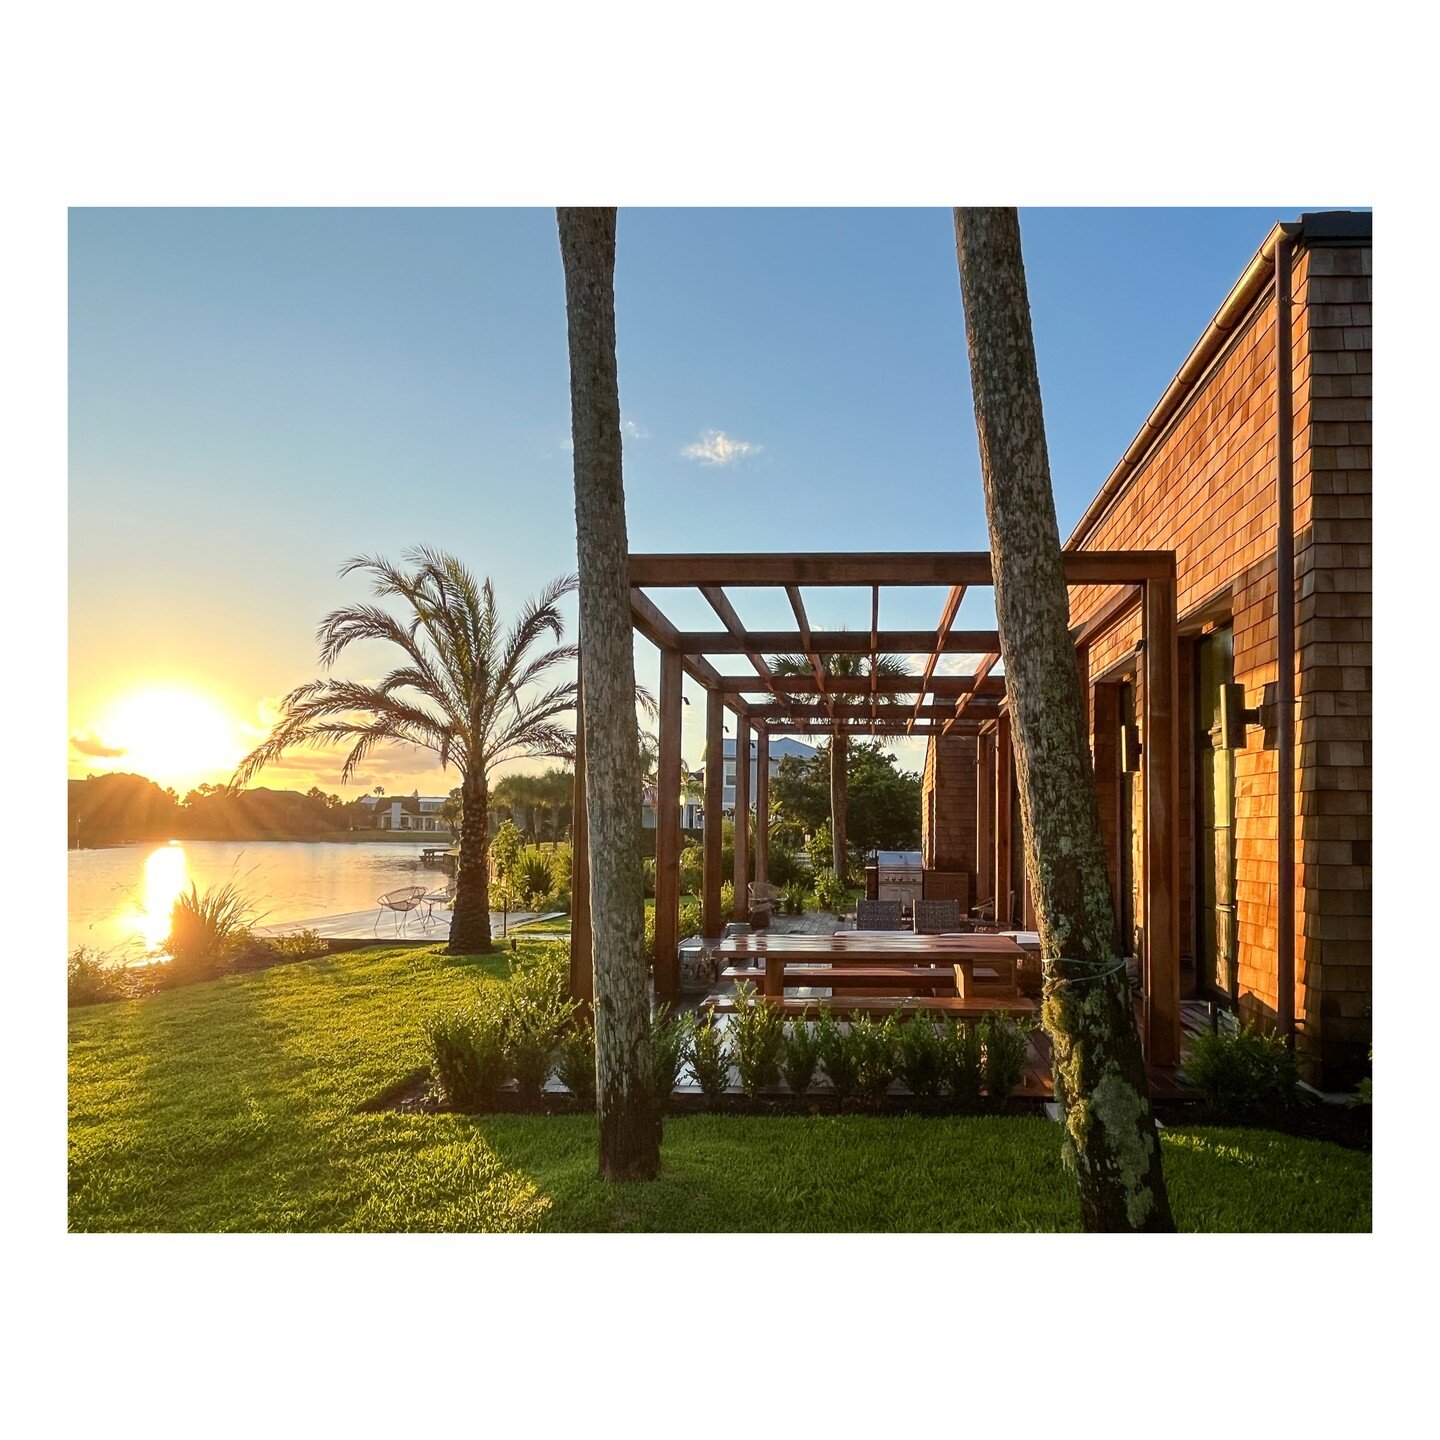 Morning light at our LaVista house in #pontevedrabeach. #residentialdesign #residentialarchitecture #outdoorliving #cedarshingles #waterfrontview